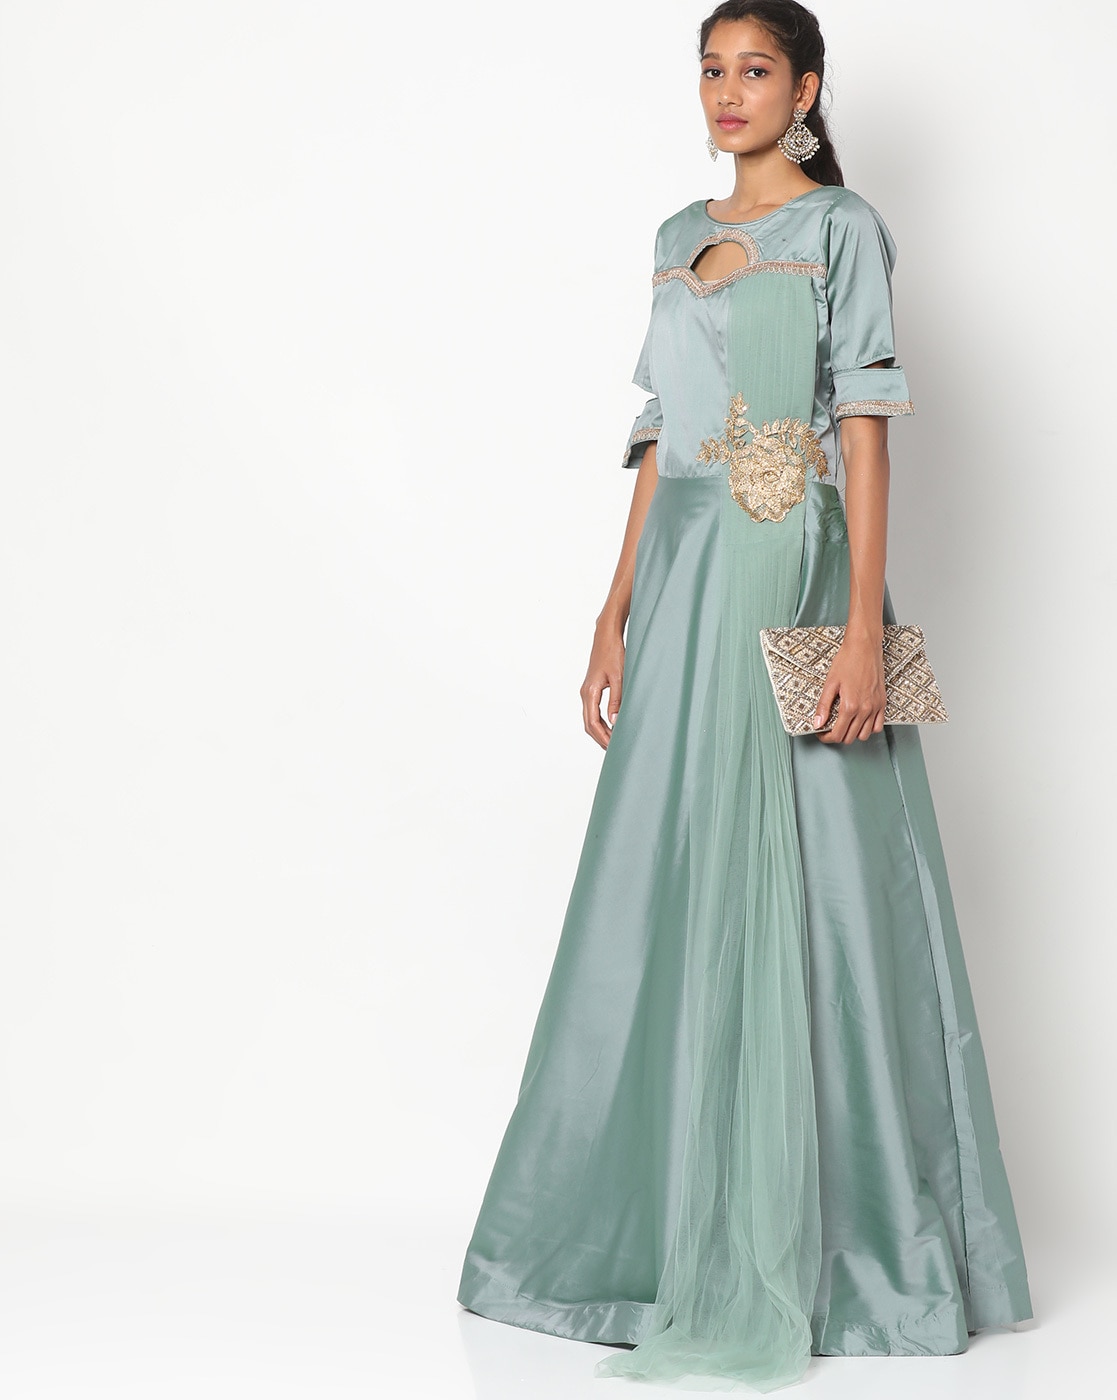 Buy Teal Blue Dresses for Women by MADAME Online | Ajio.com